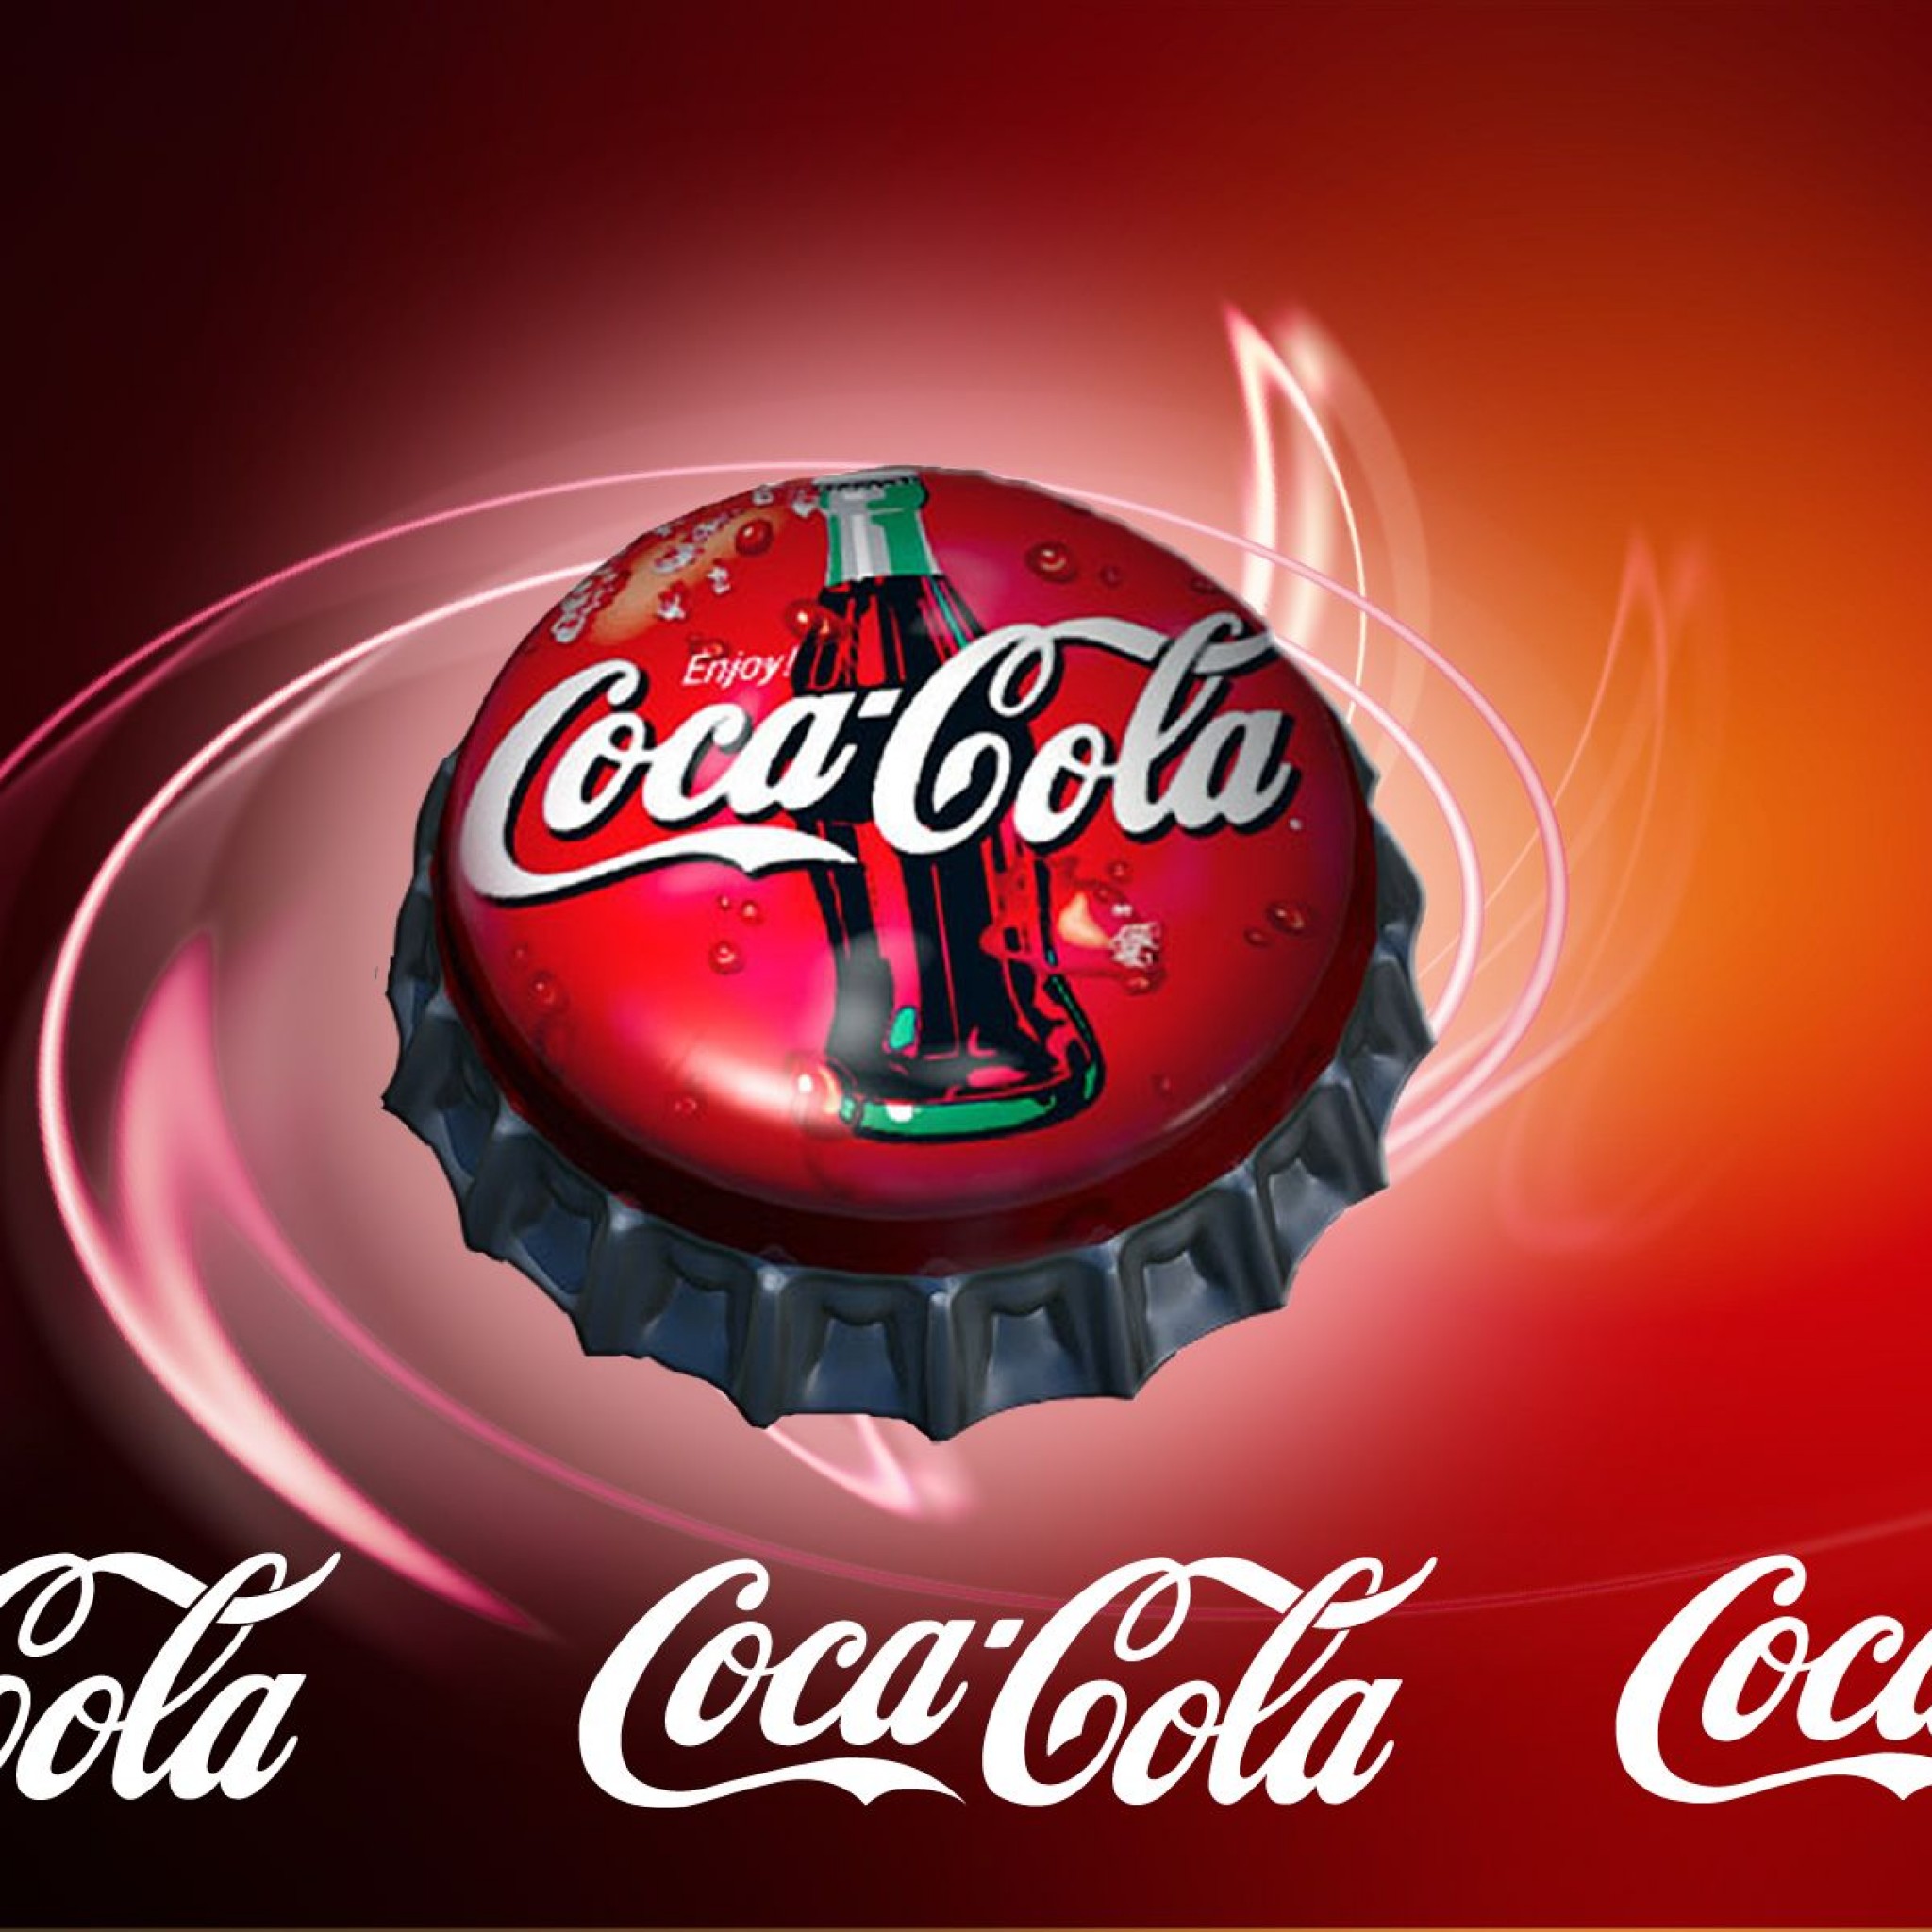 Coca Cola Backgrounds Wallpaper Wallpapers Pic Ipad タブレット壁紙ギャラリー